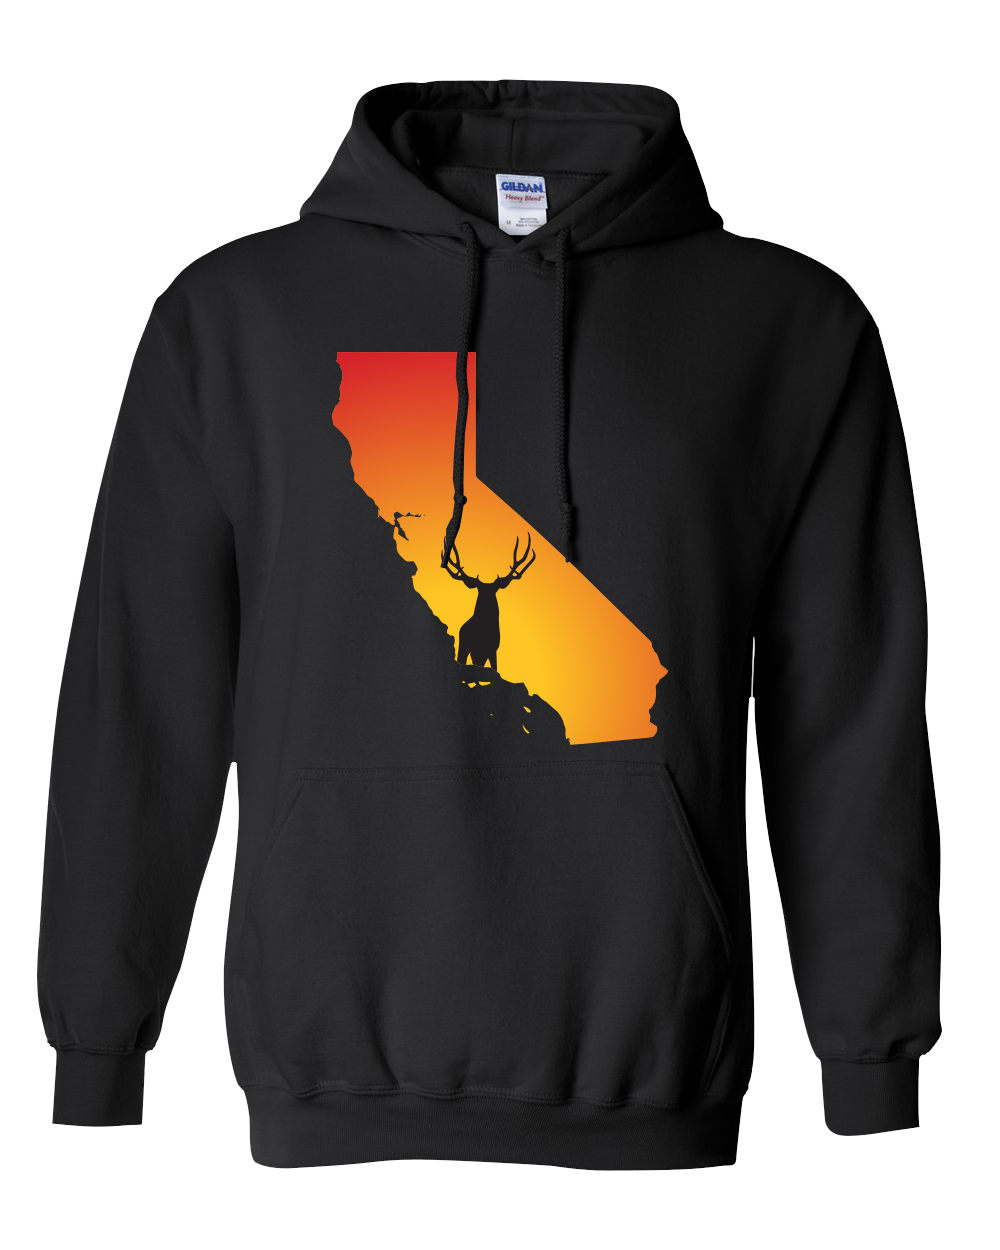 Pullover Hooded Sweatshirt California Black Mule Deer Vibrant Design High Quality Tight Knit Ring Spun Low Maintenance Cotton Printed With The Newest Available Color Transfer Technology